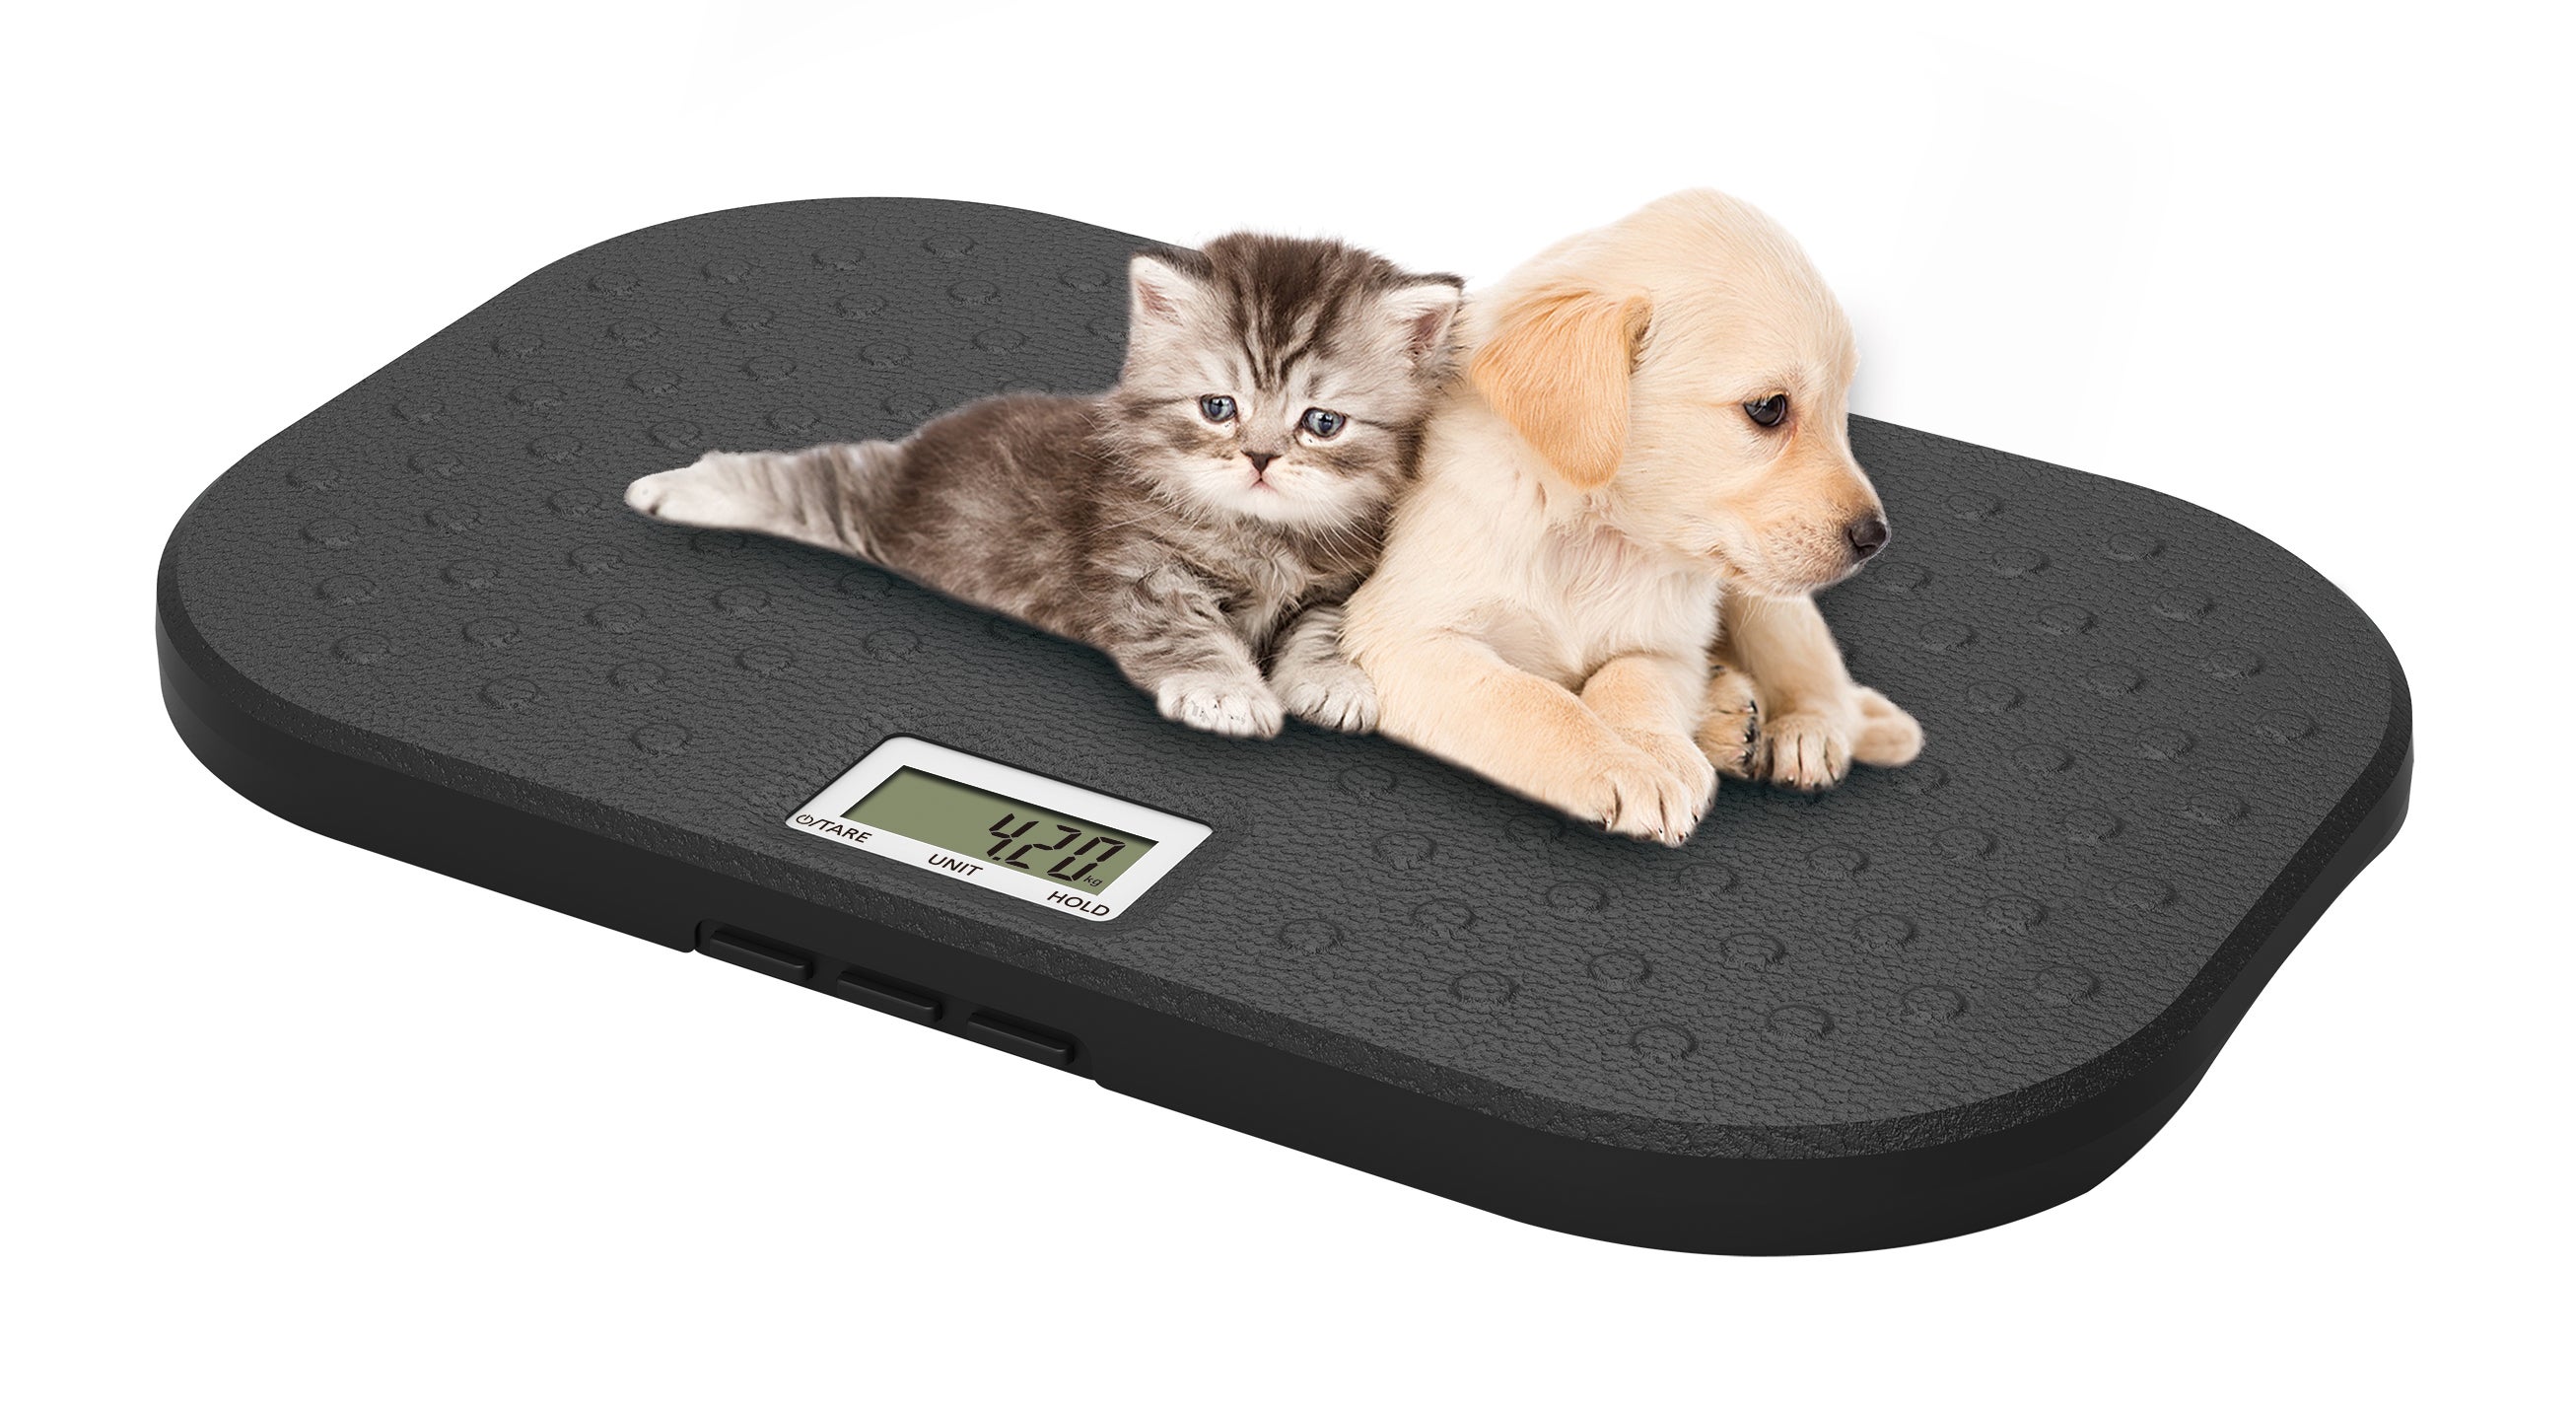 Digital Electronic Pet scale Vet veterinary Scales dog cat kitten puppy Weight tracker